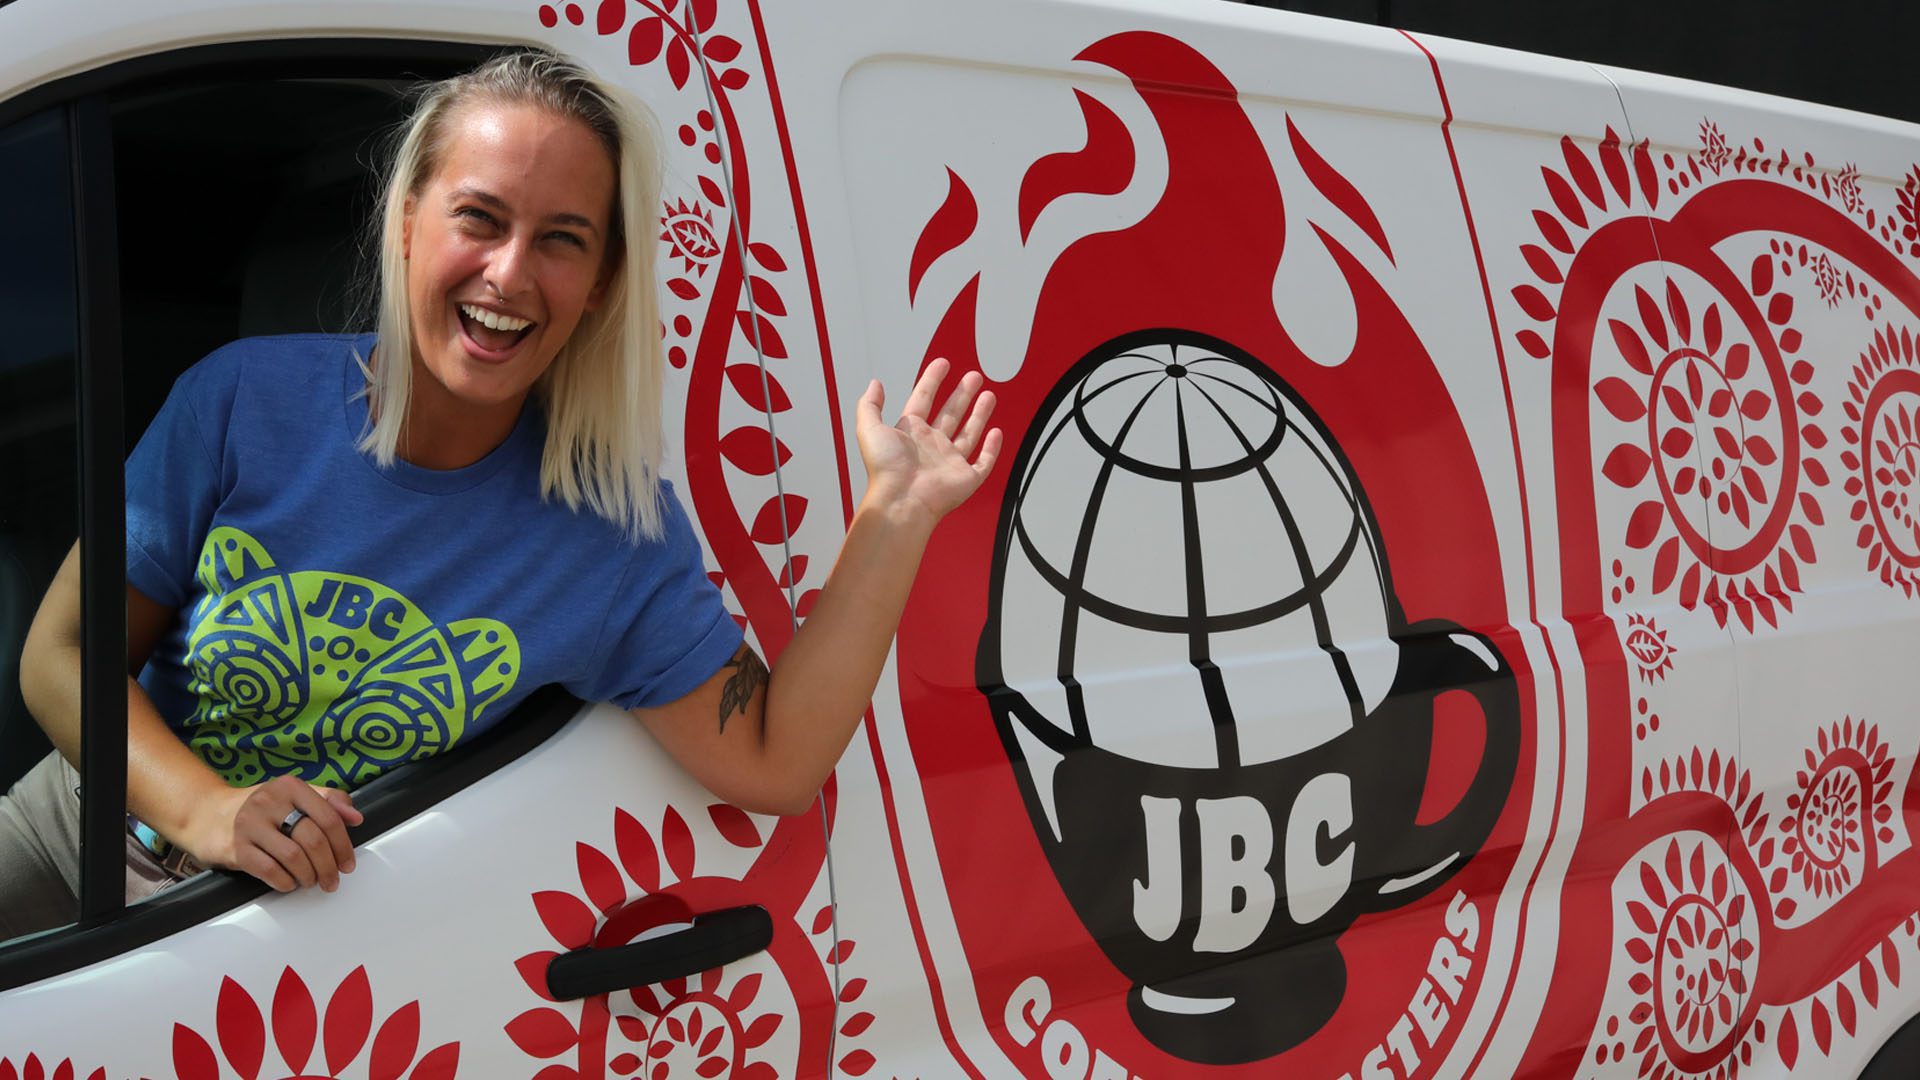 JBC Coffee Roasters Van was Wrapped by Madison Graphics Company